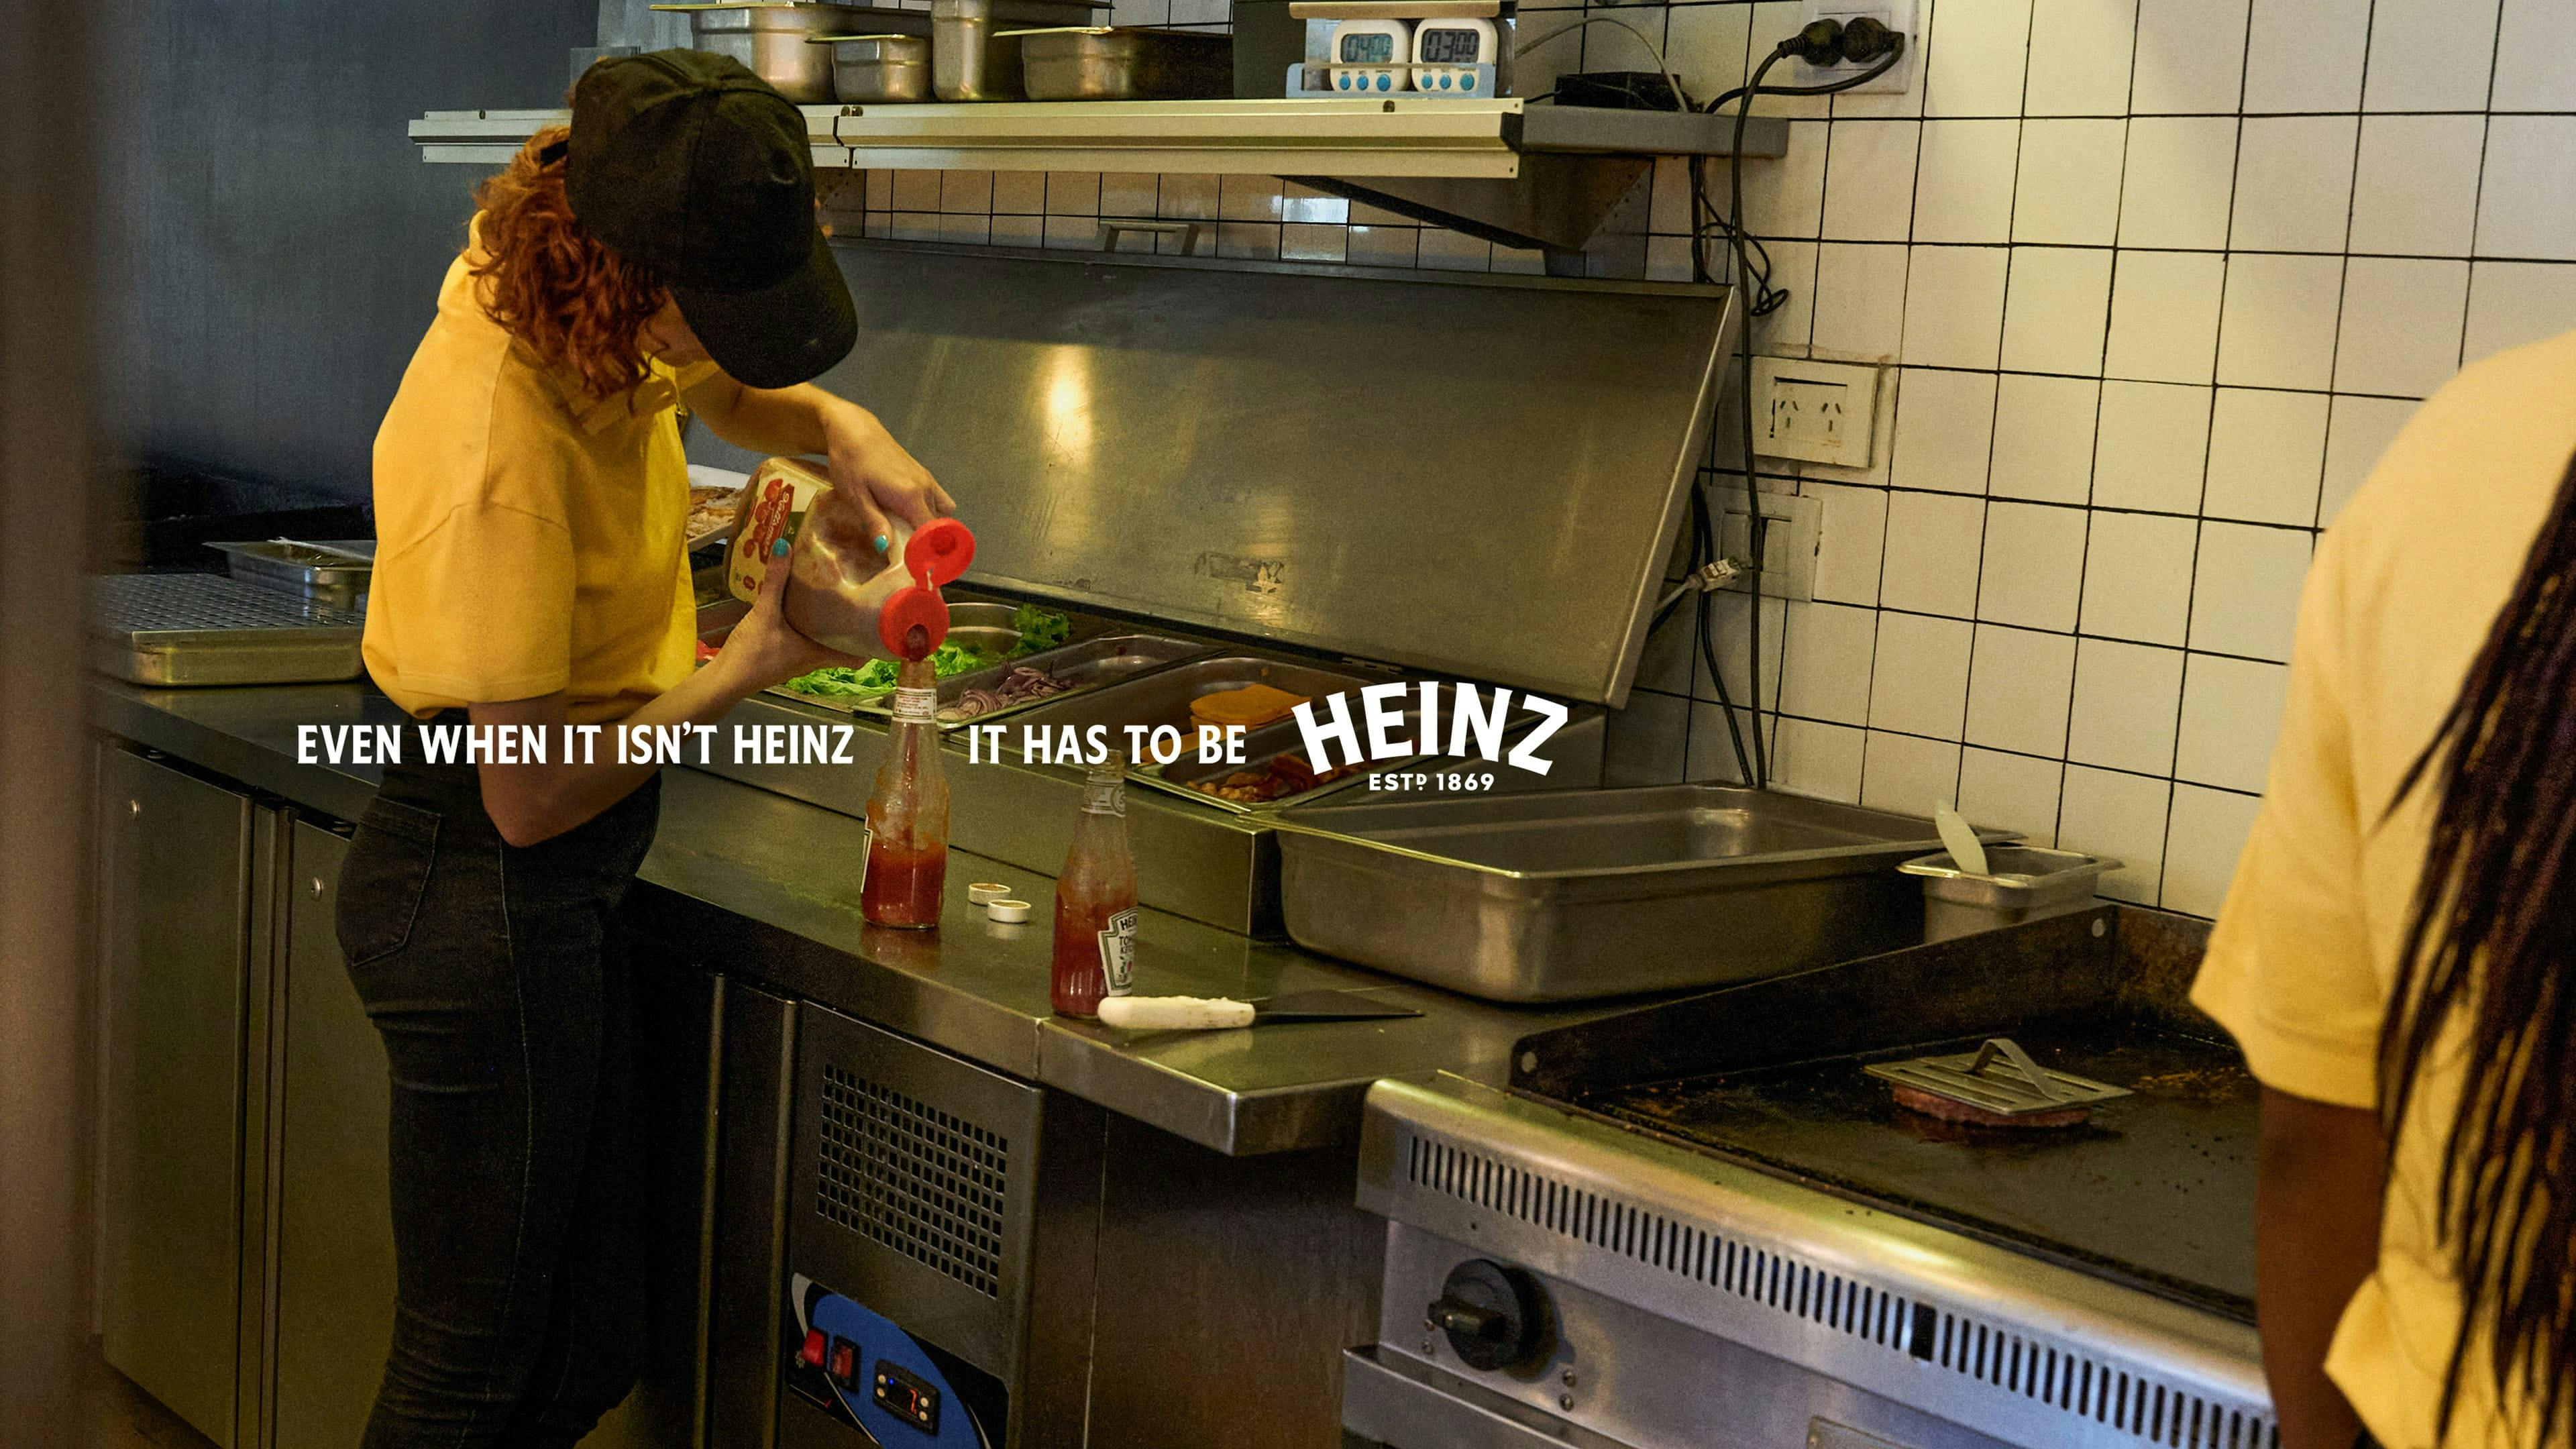 A person in a yellow shirt is dumping non-Heinz ketchup into a Heinz ketchup bottle in a restaurant kitchen setting, with the text "Even when it isn't Heinz, it has to be Heinz."